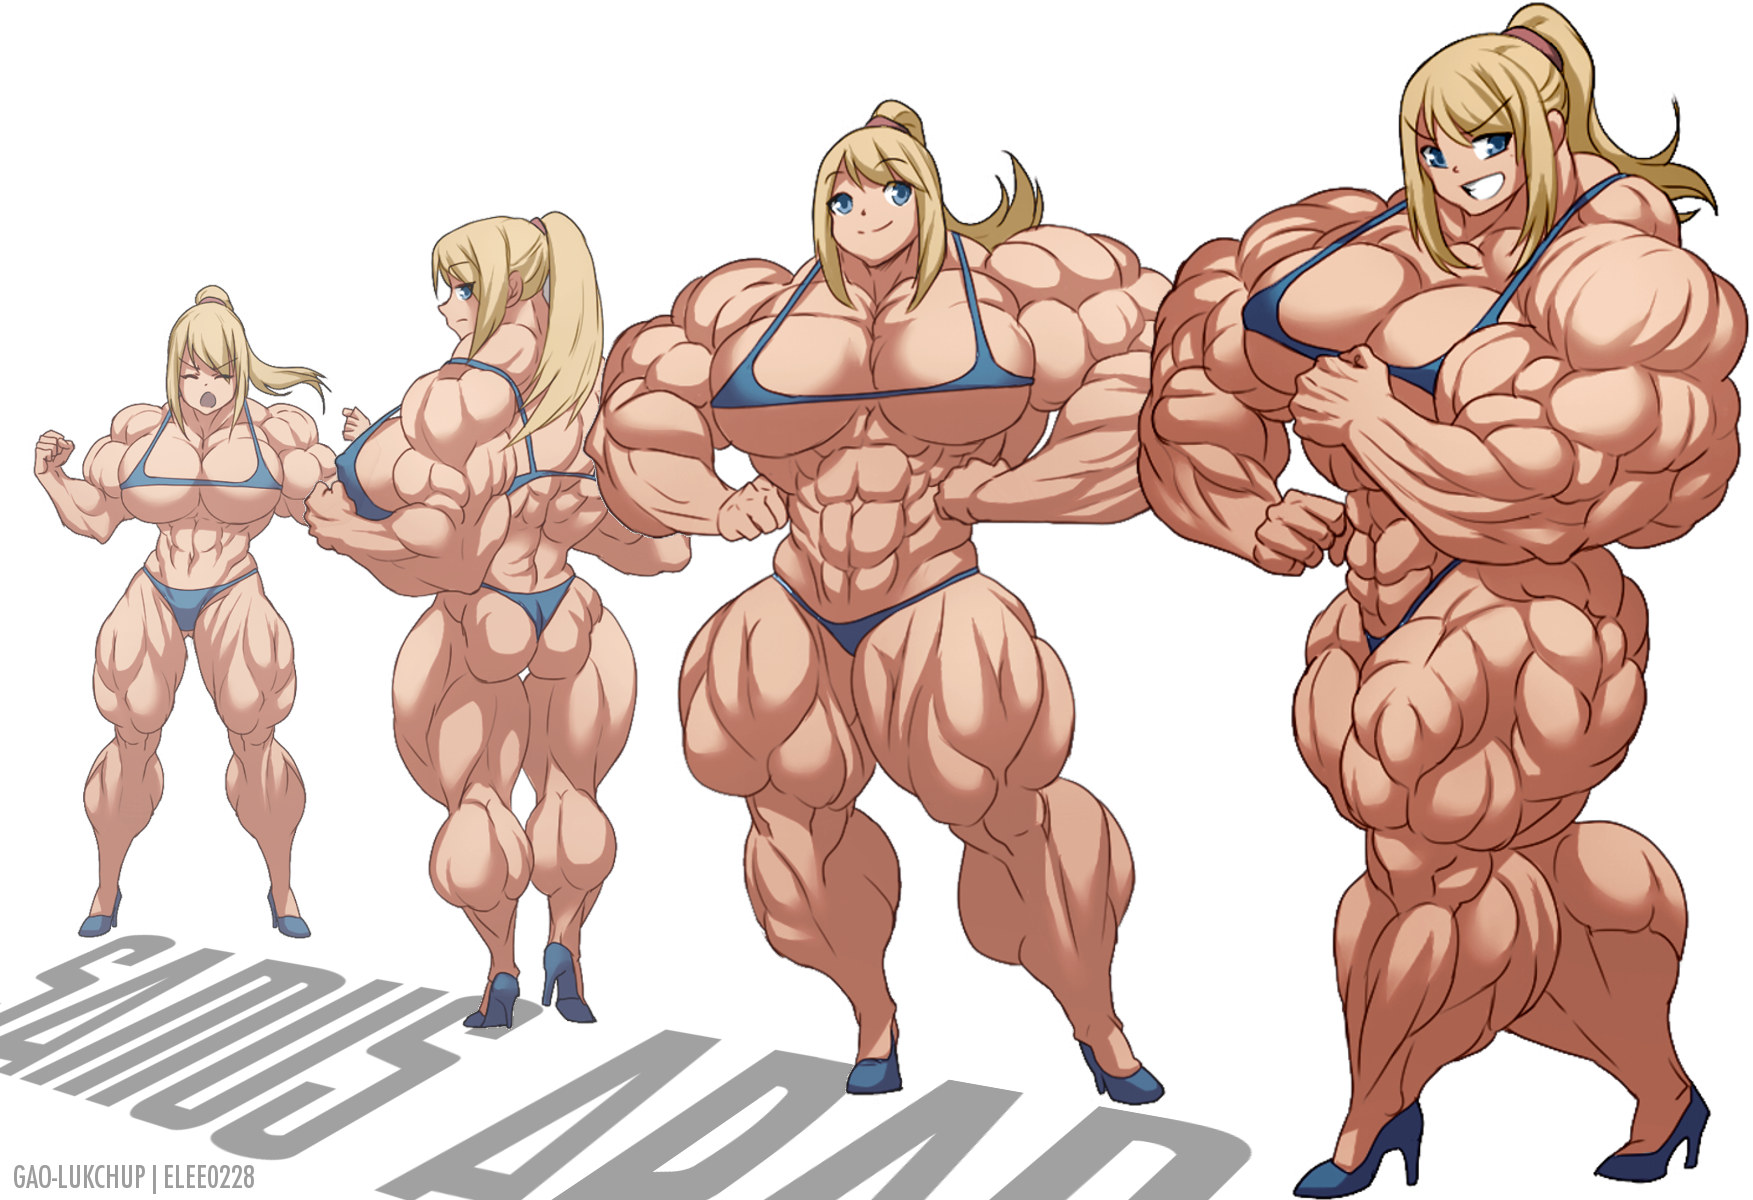 Female superbodybuilder transformationfemale muscle growth animation